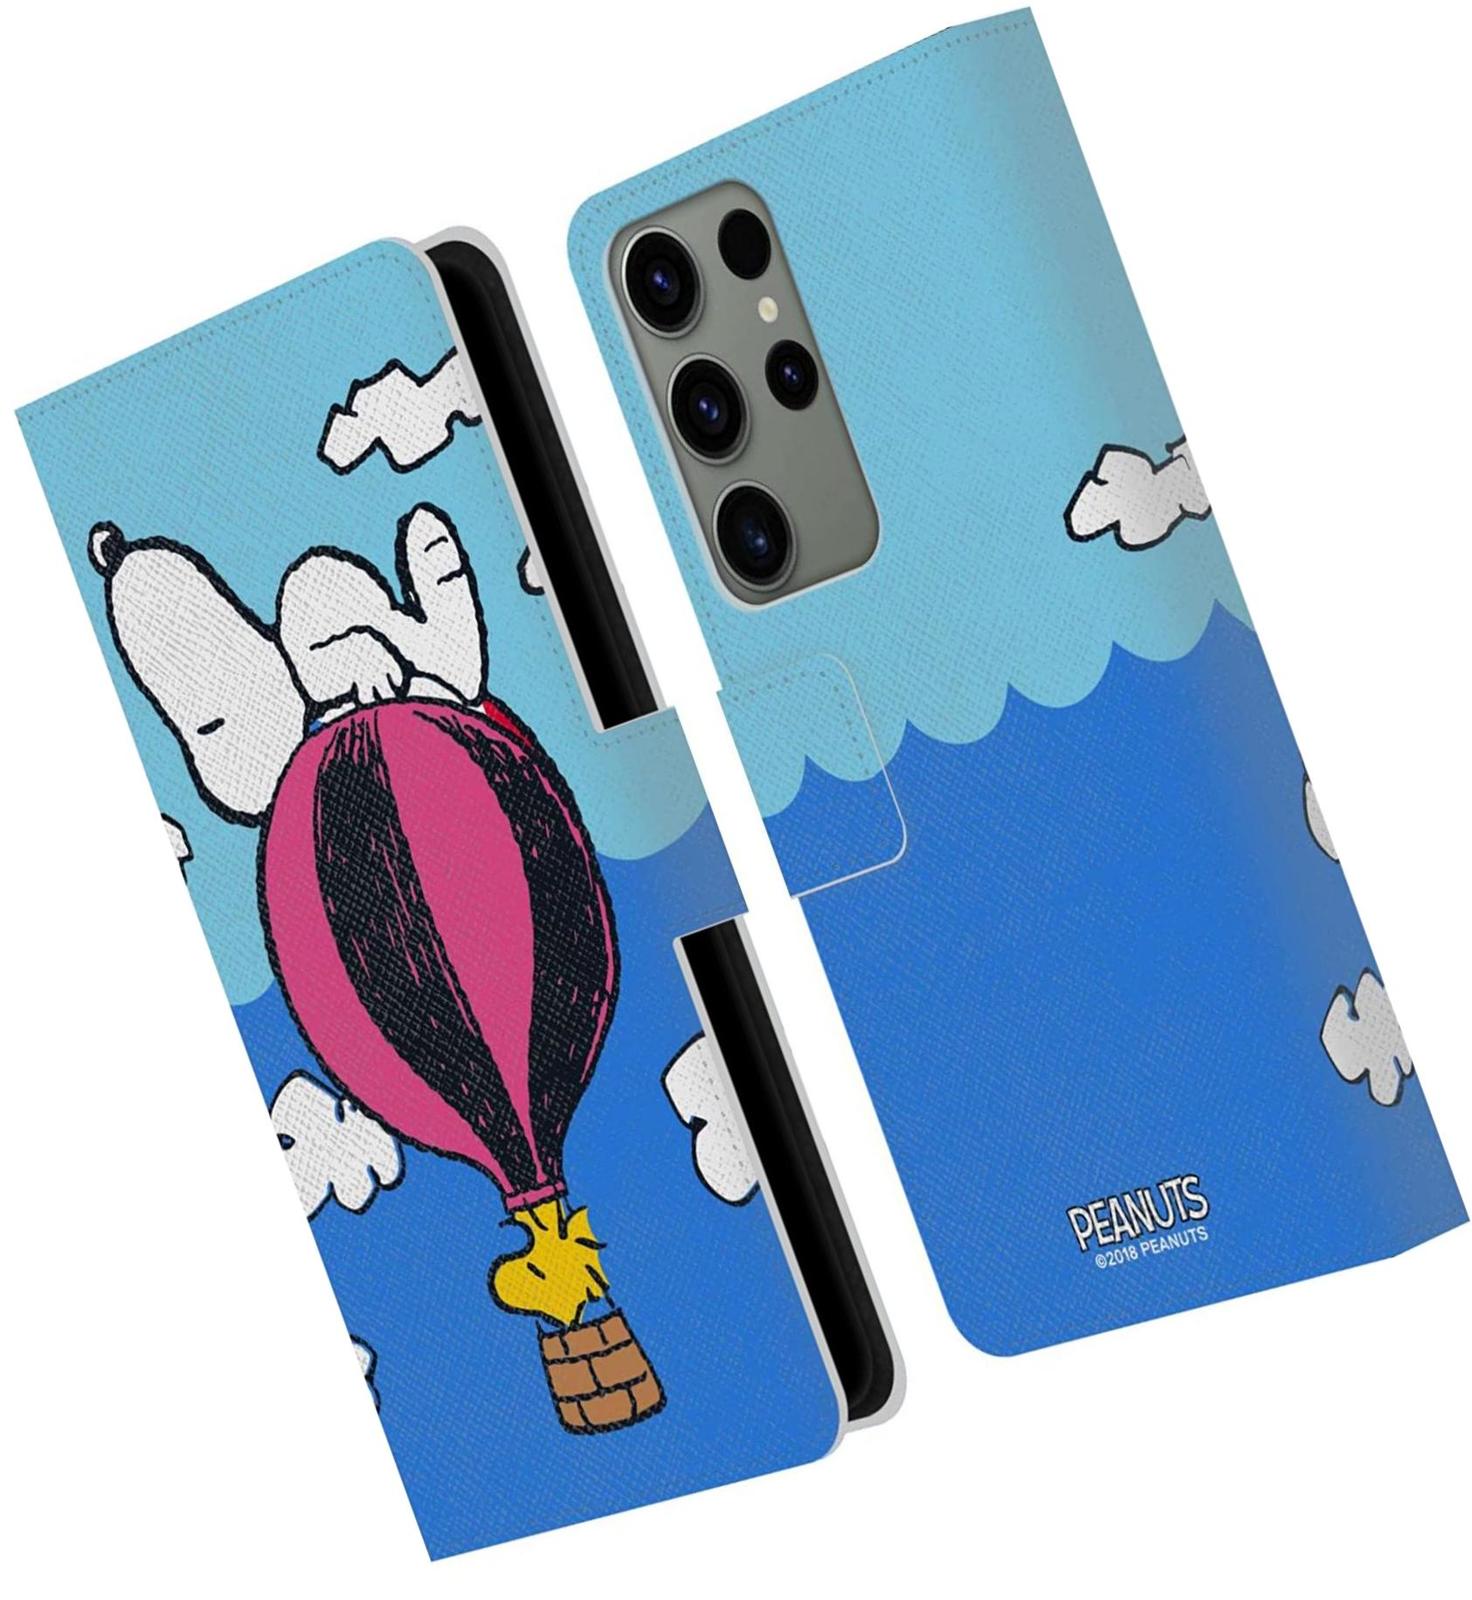 Head Case Designs Officially Licensed Peanuts Snoopy and and - $84.23